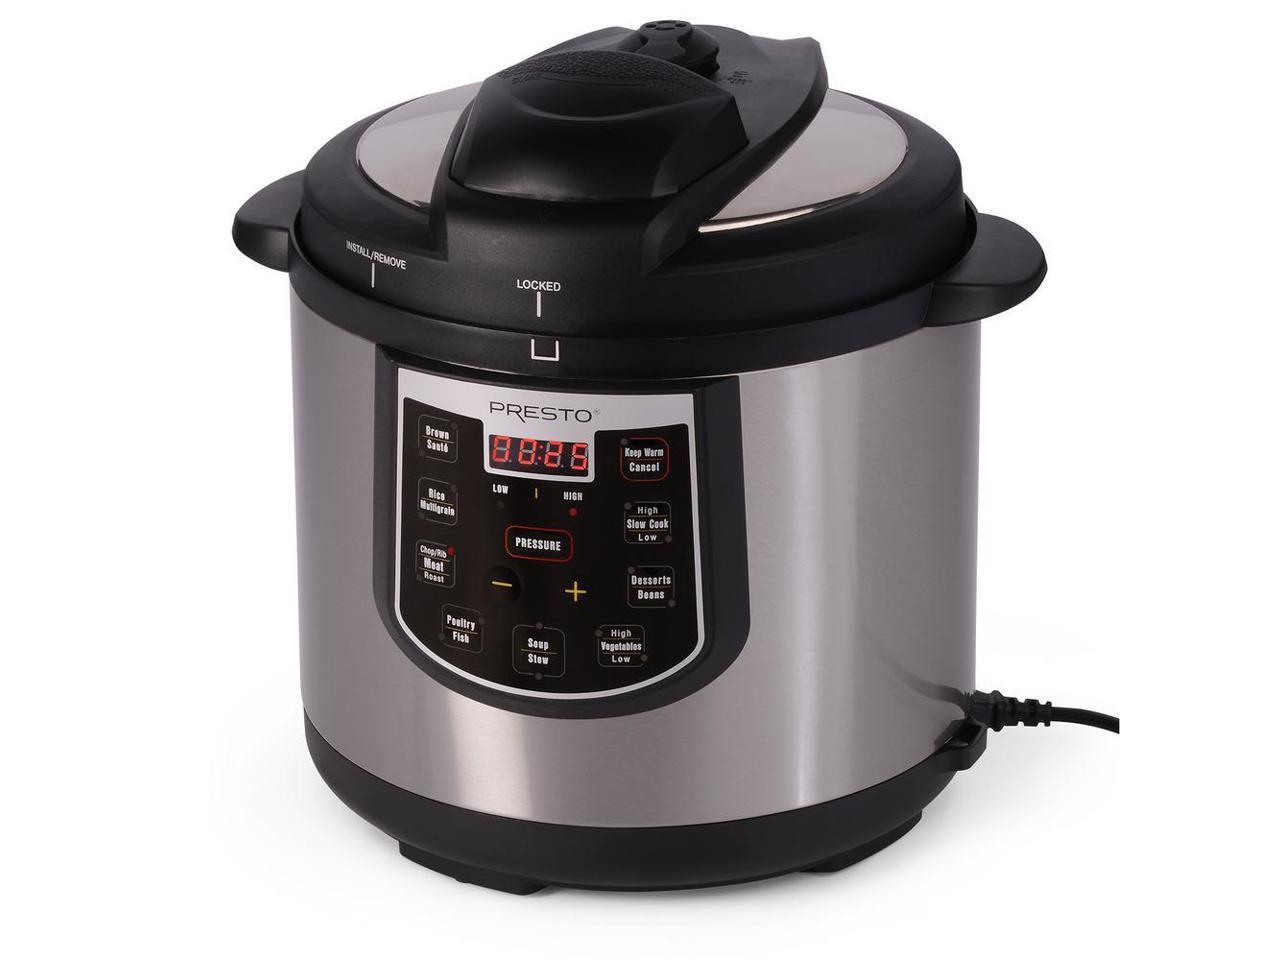 Presto 02141 6-Quart Electric Pressure Cooker, Stainless and Black ...